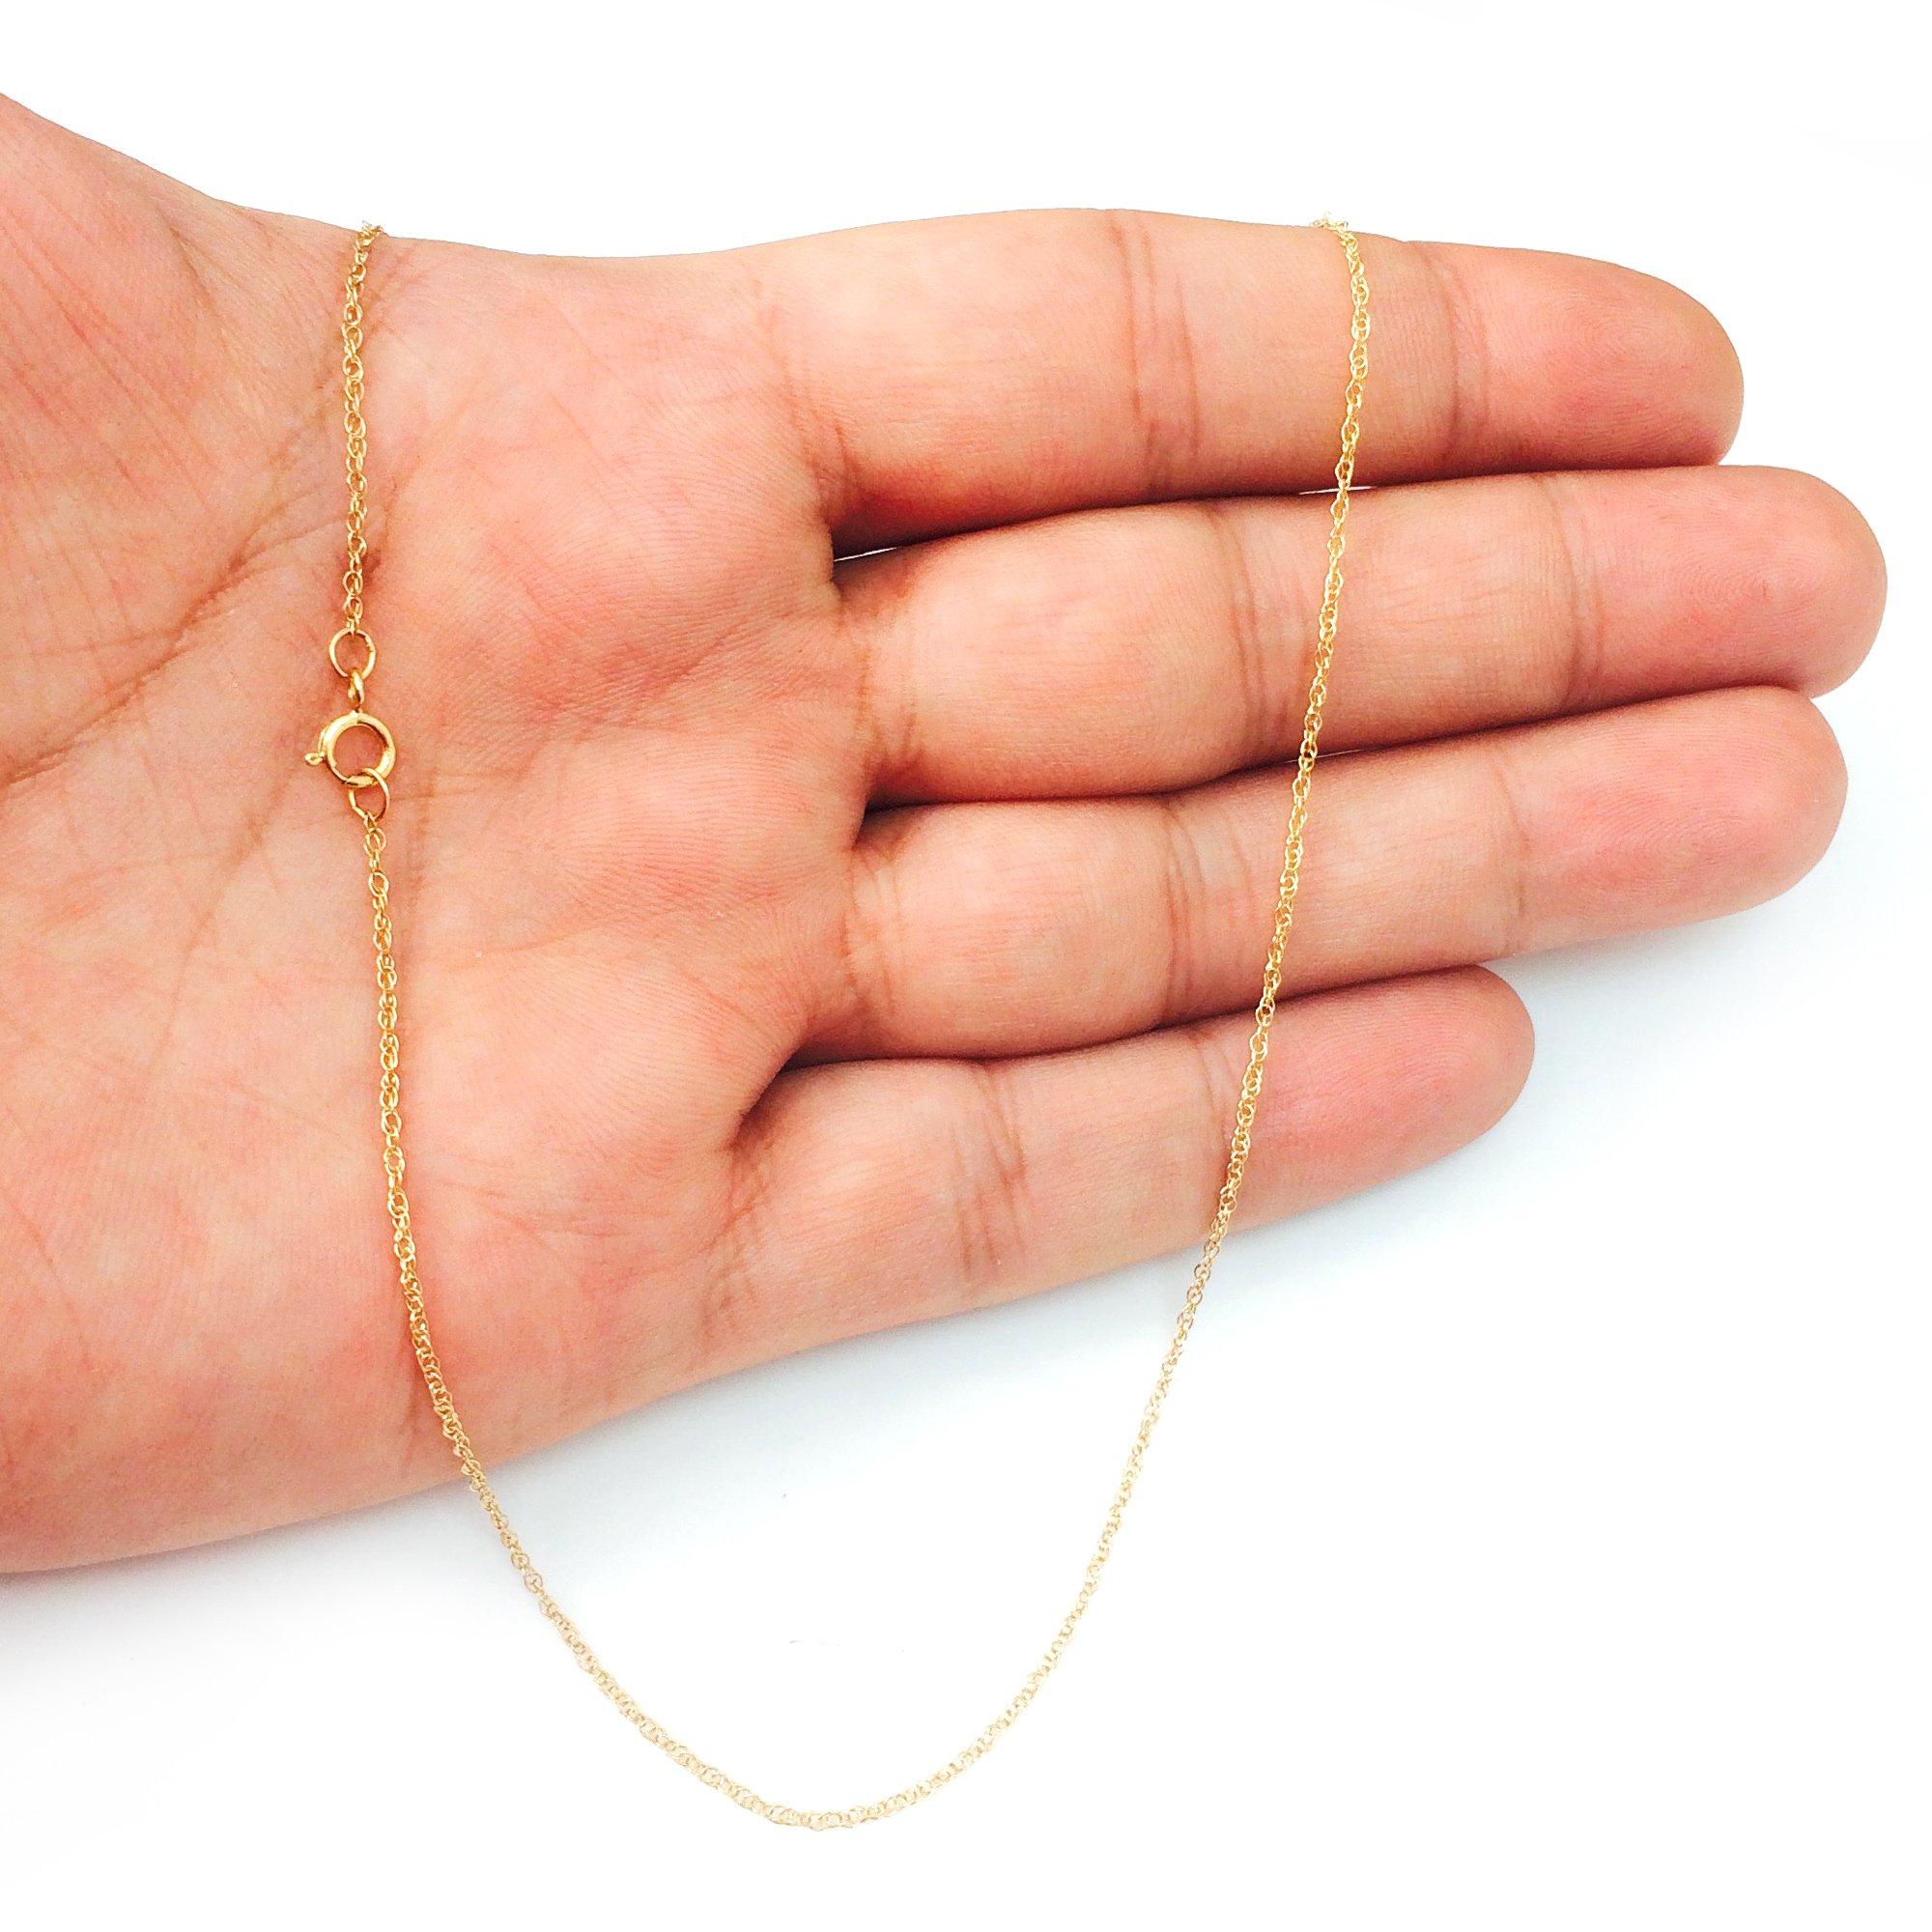 Jewelry Affairs 14k Yellow Real Solid Gold Rope Chain Necklace, 0.9mm